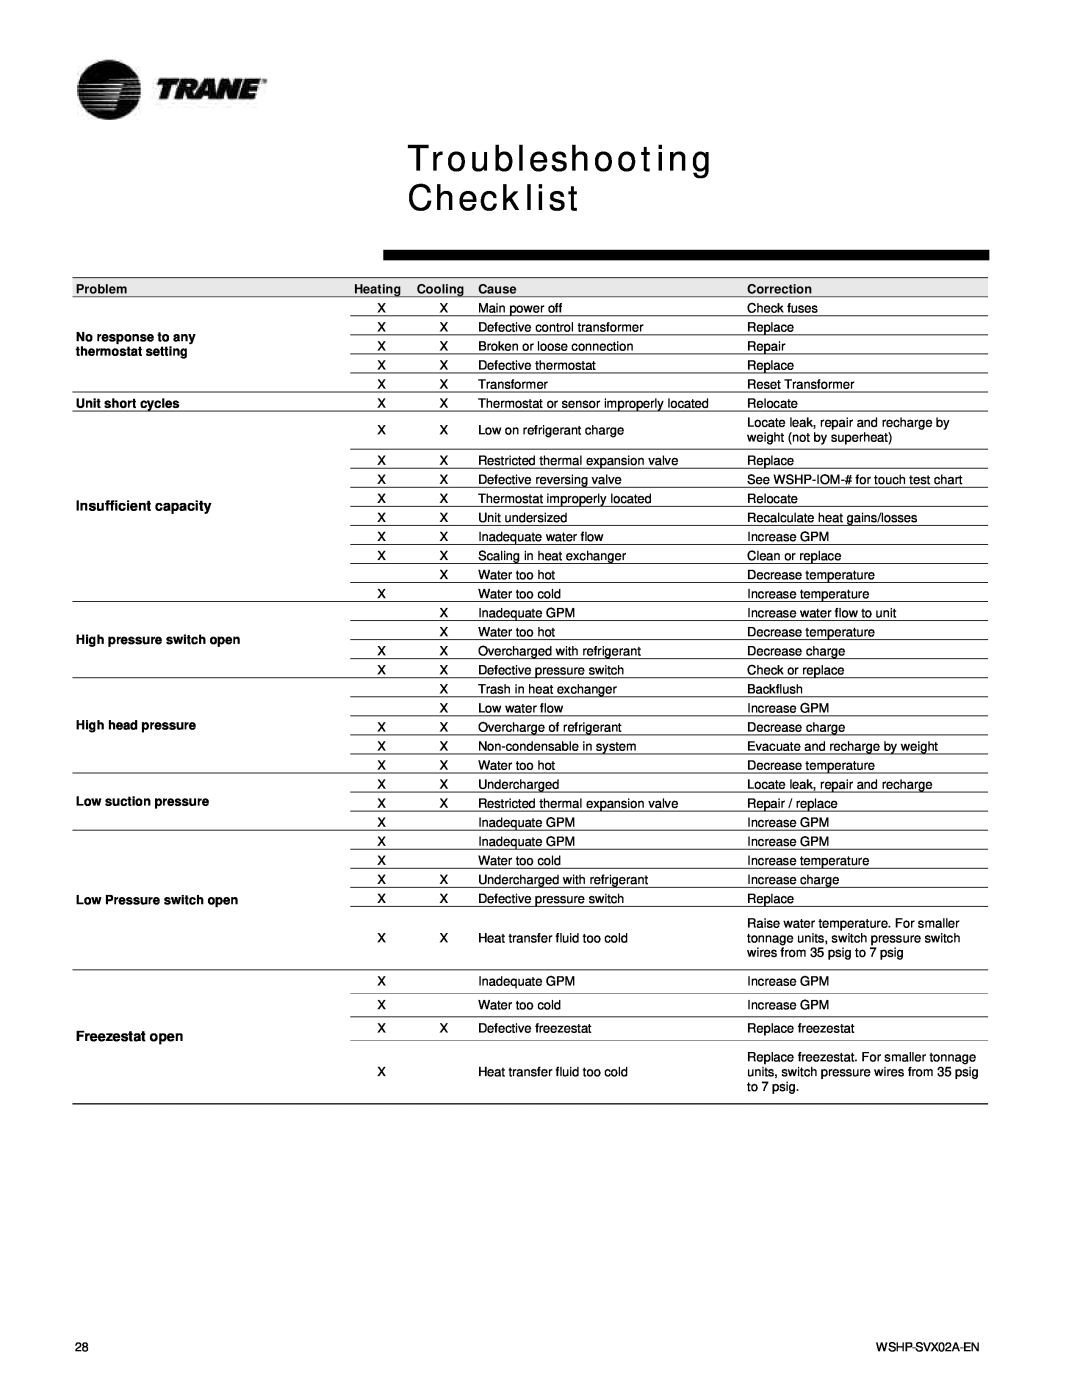 Trane WPWD Troubleshooting Checklist, Problem No response to any thermostat setting, Unit short cycles, Heating, Cooling 